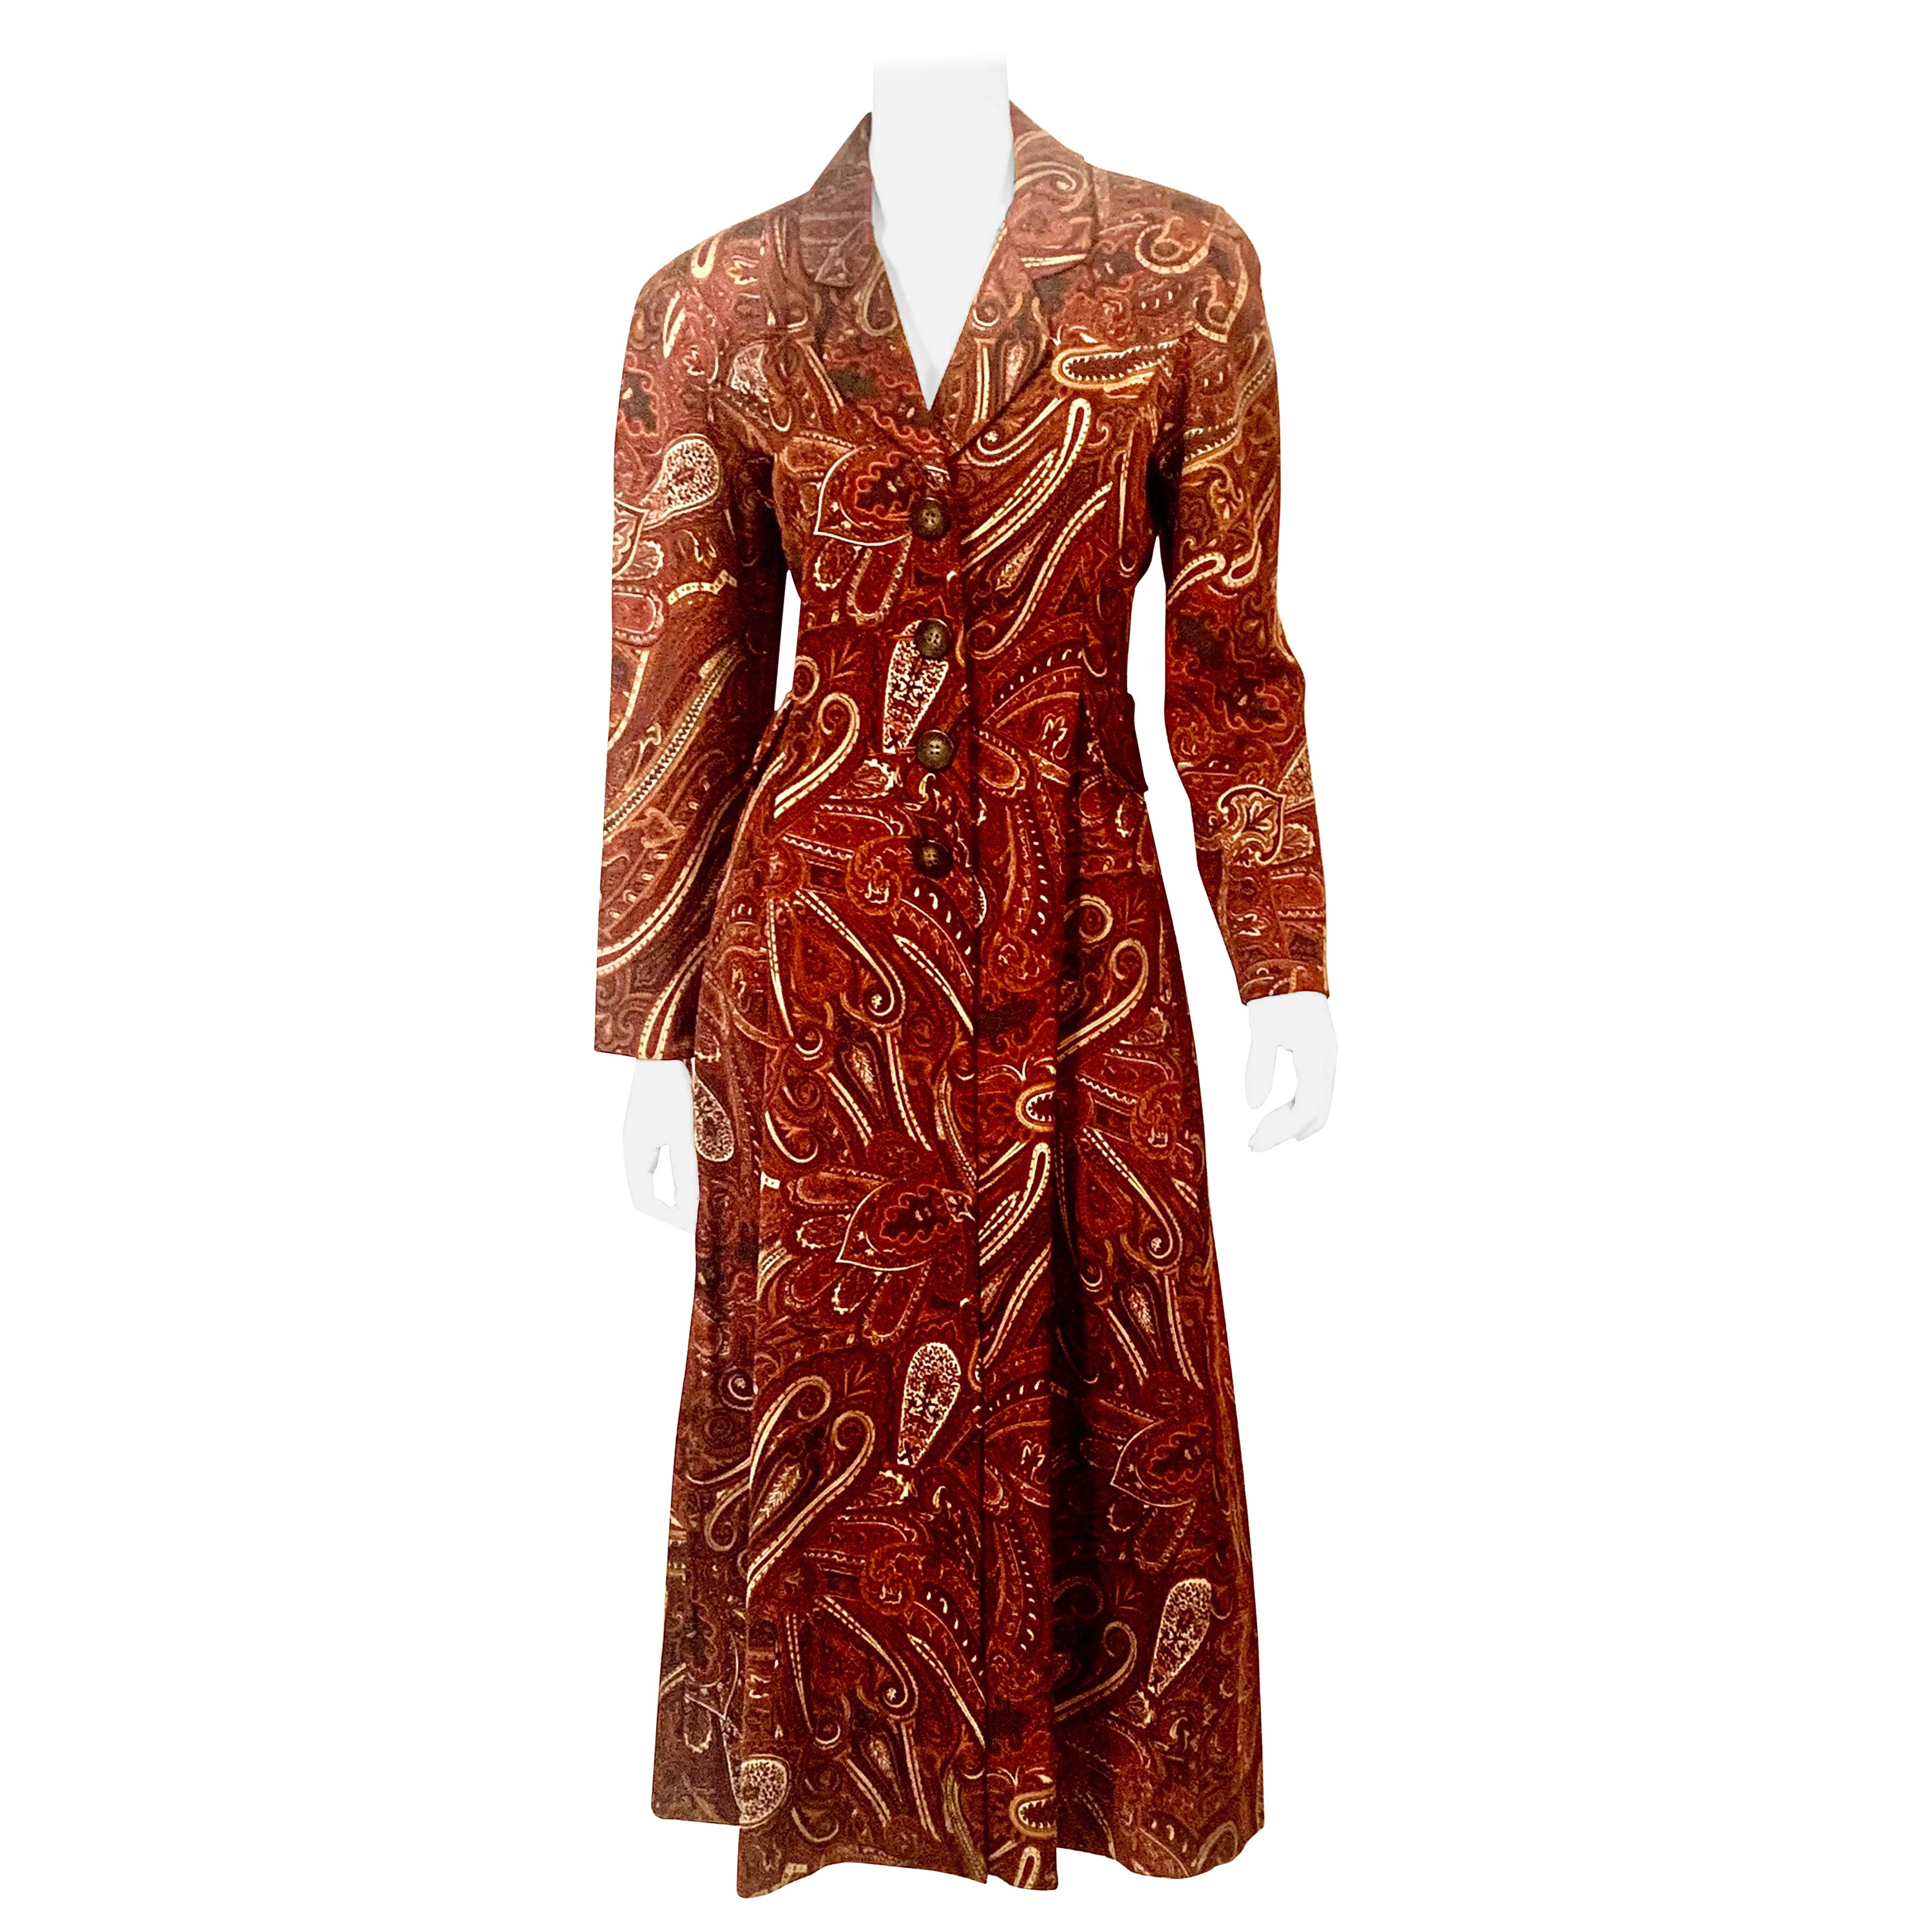 Bill Blass Paisley Patterned Coat in a Larger Size For Sale